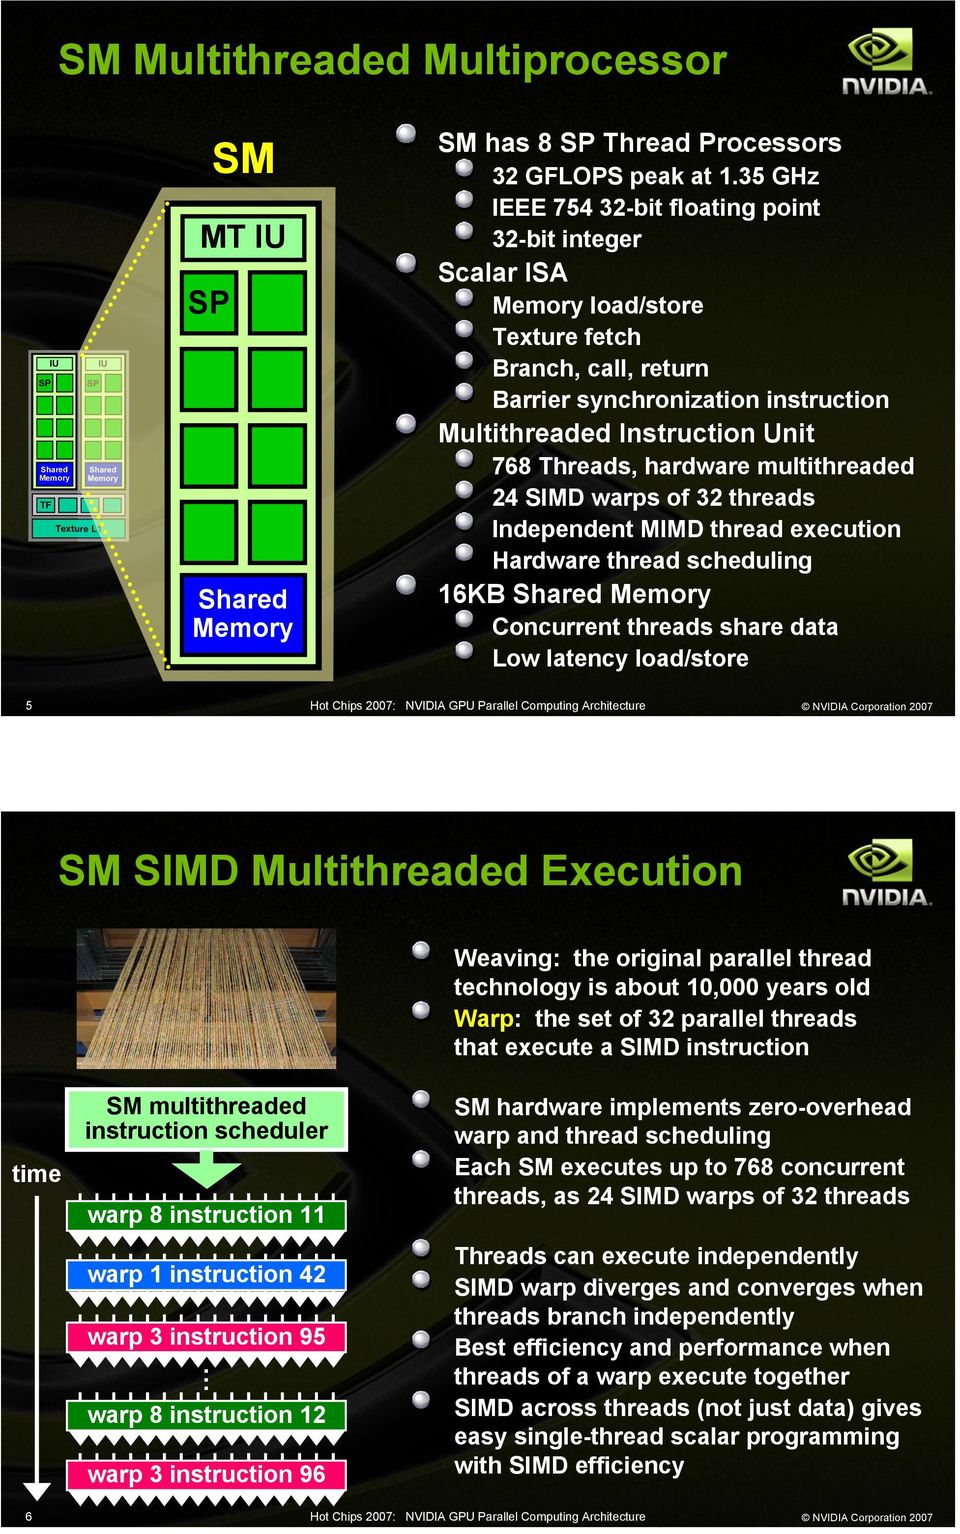 multithreaded 24 SIMD warps of 32 threads Independent MIMD thread execution Hardware thread scheduling 16KB Concurrent threads share data Low latency load/store 5 SM SIMD Multithreaded Execution time